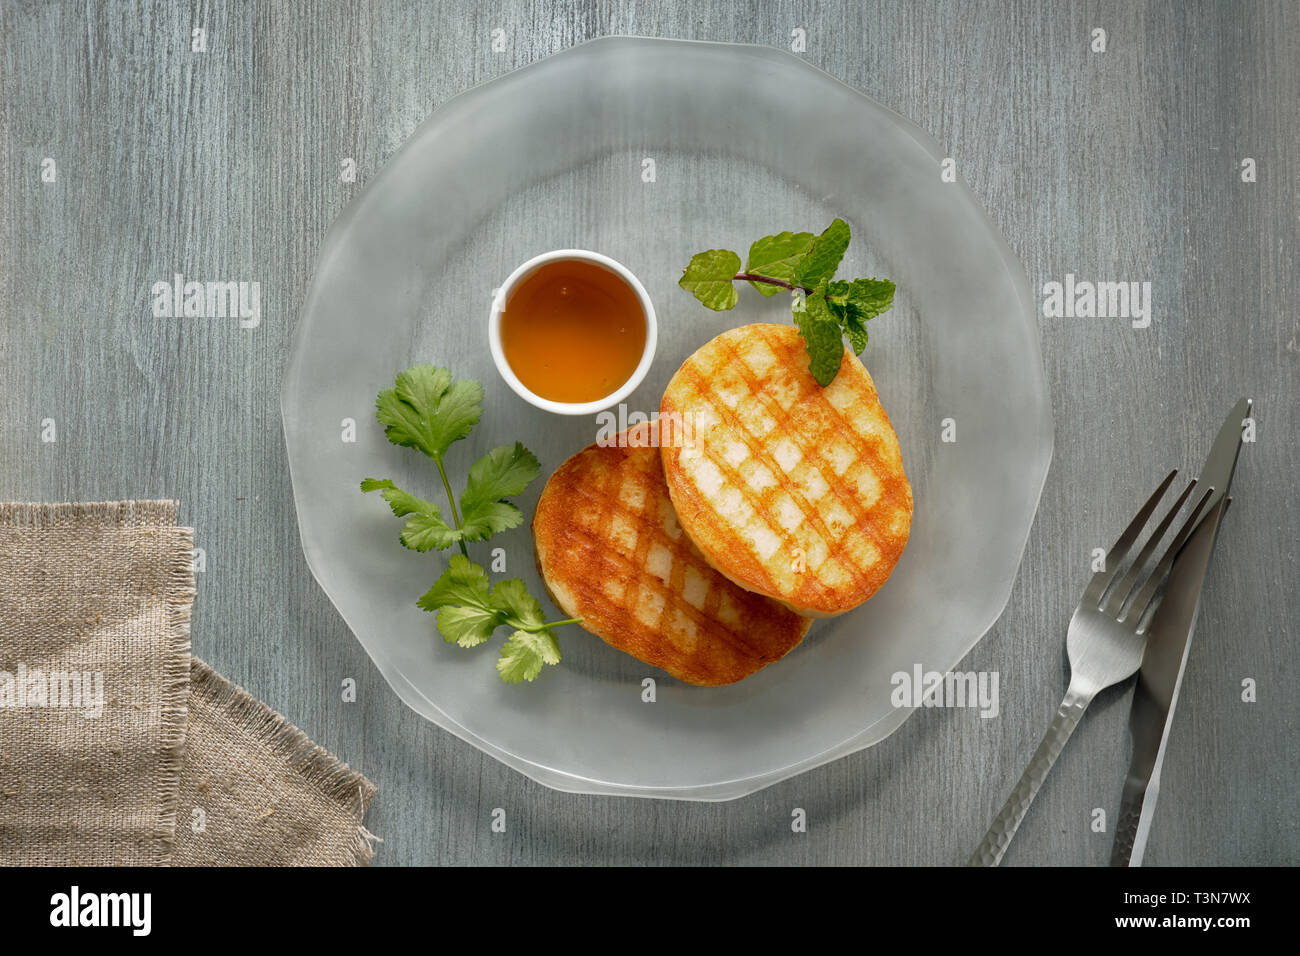 Grilled round slices of Greek cheese with honey, fresh mint and coriander leaves. Flat lay on light grey table. Stock Photo